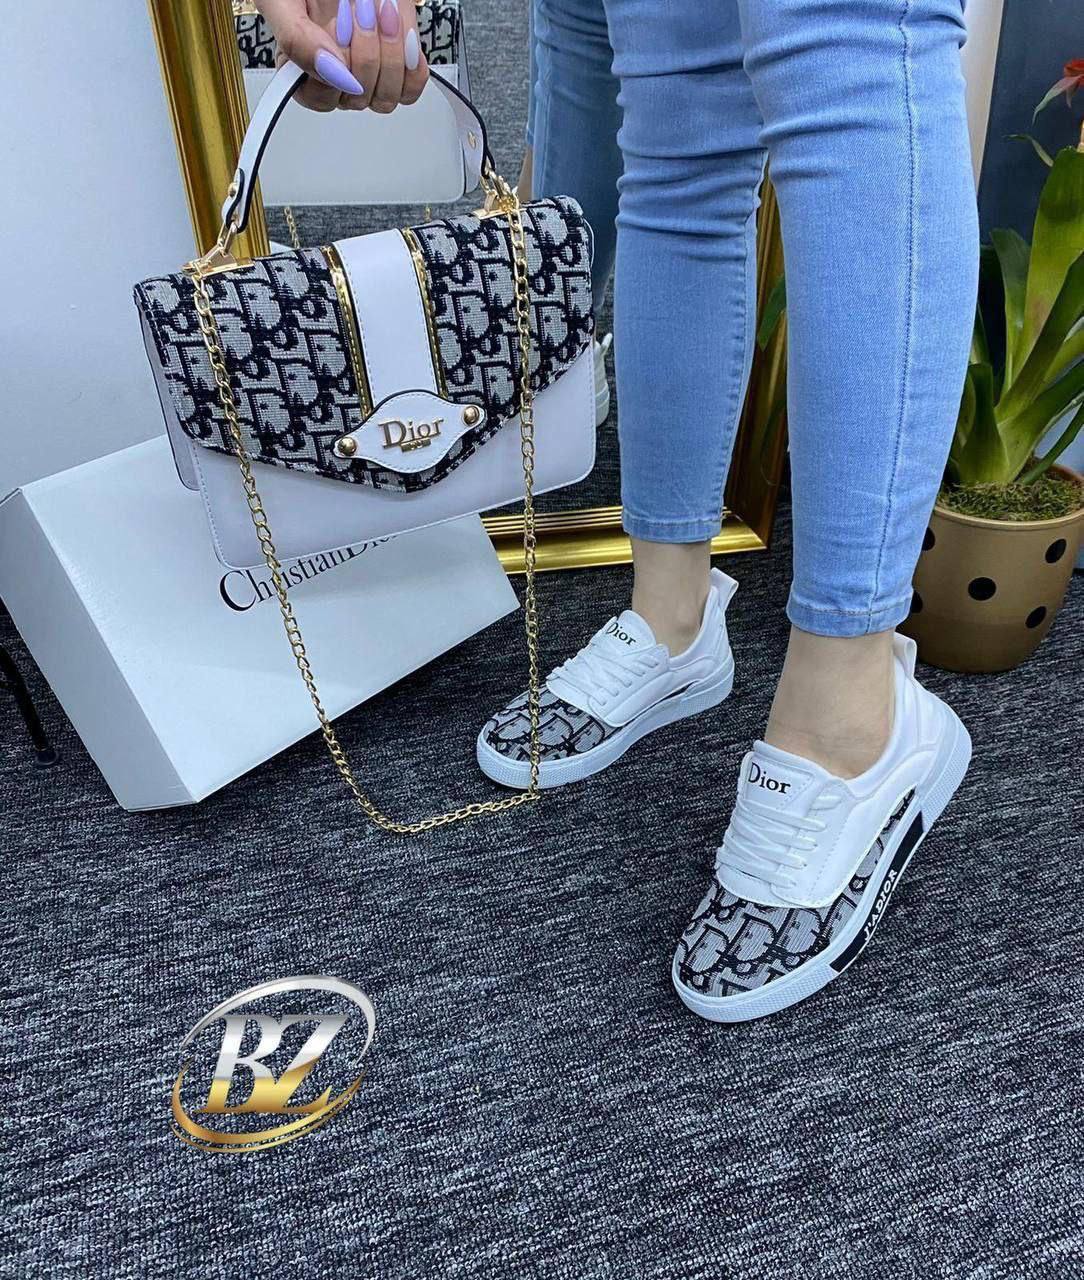 Christian dior minion sneakers and shoulder handbags